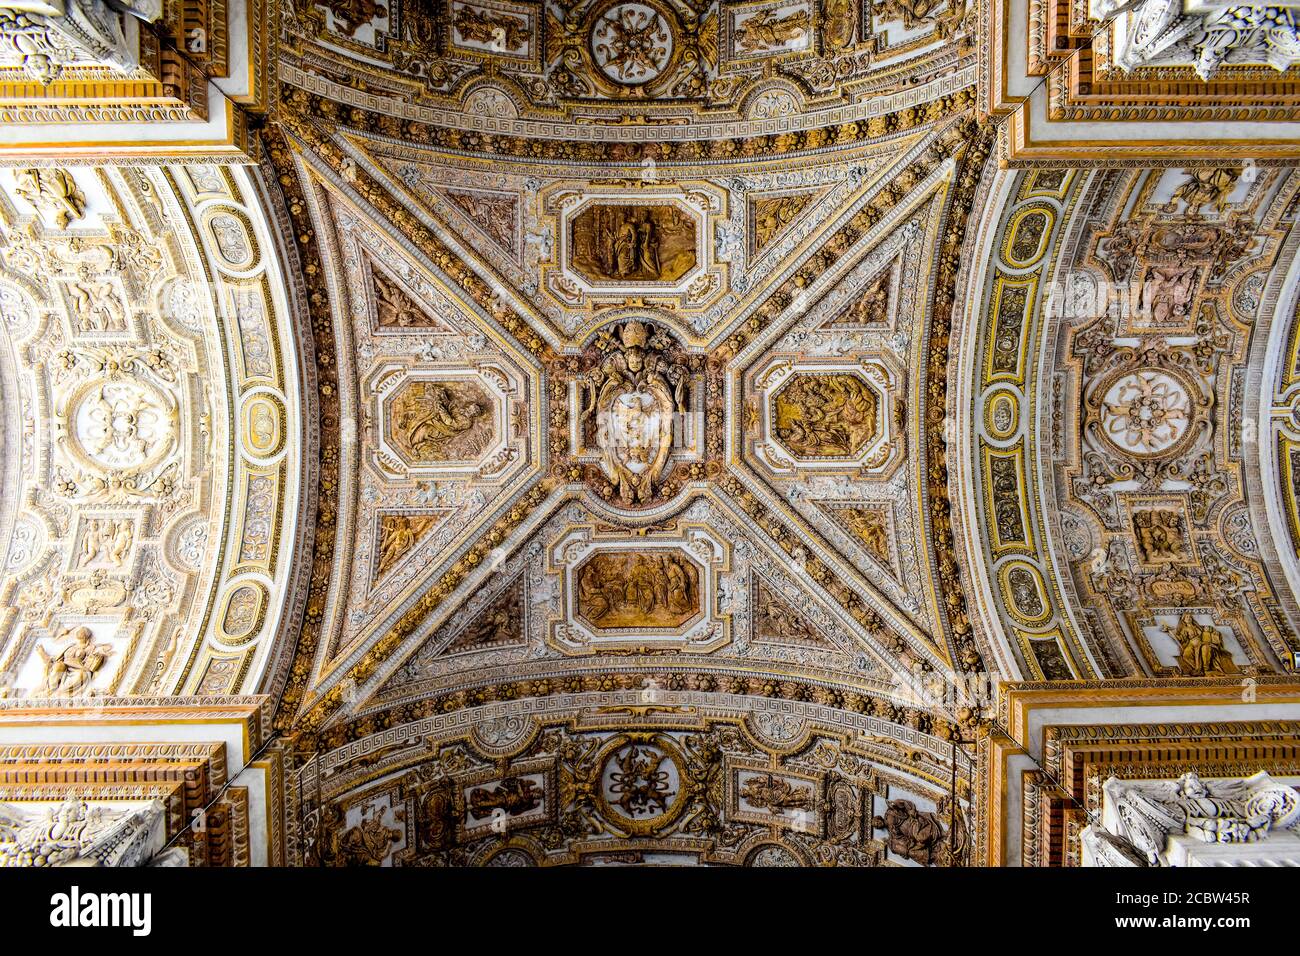 The intricate ceiling at Saint Peter's Basilica Stock Photo